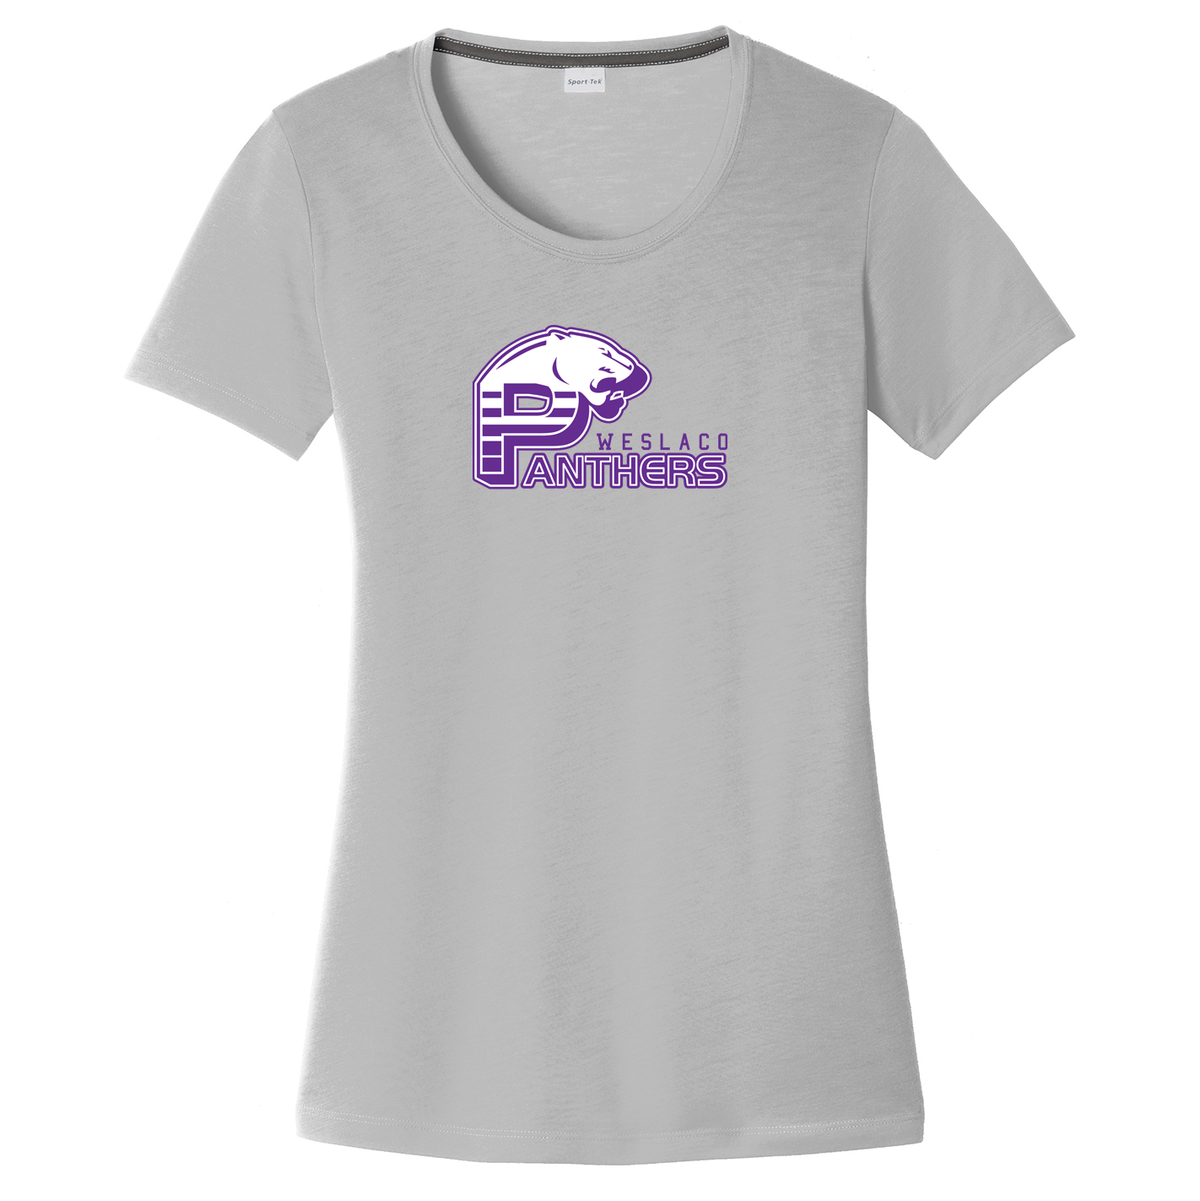 Weslaco Panthers Women's CottonTouch Performance T-Shirt